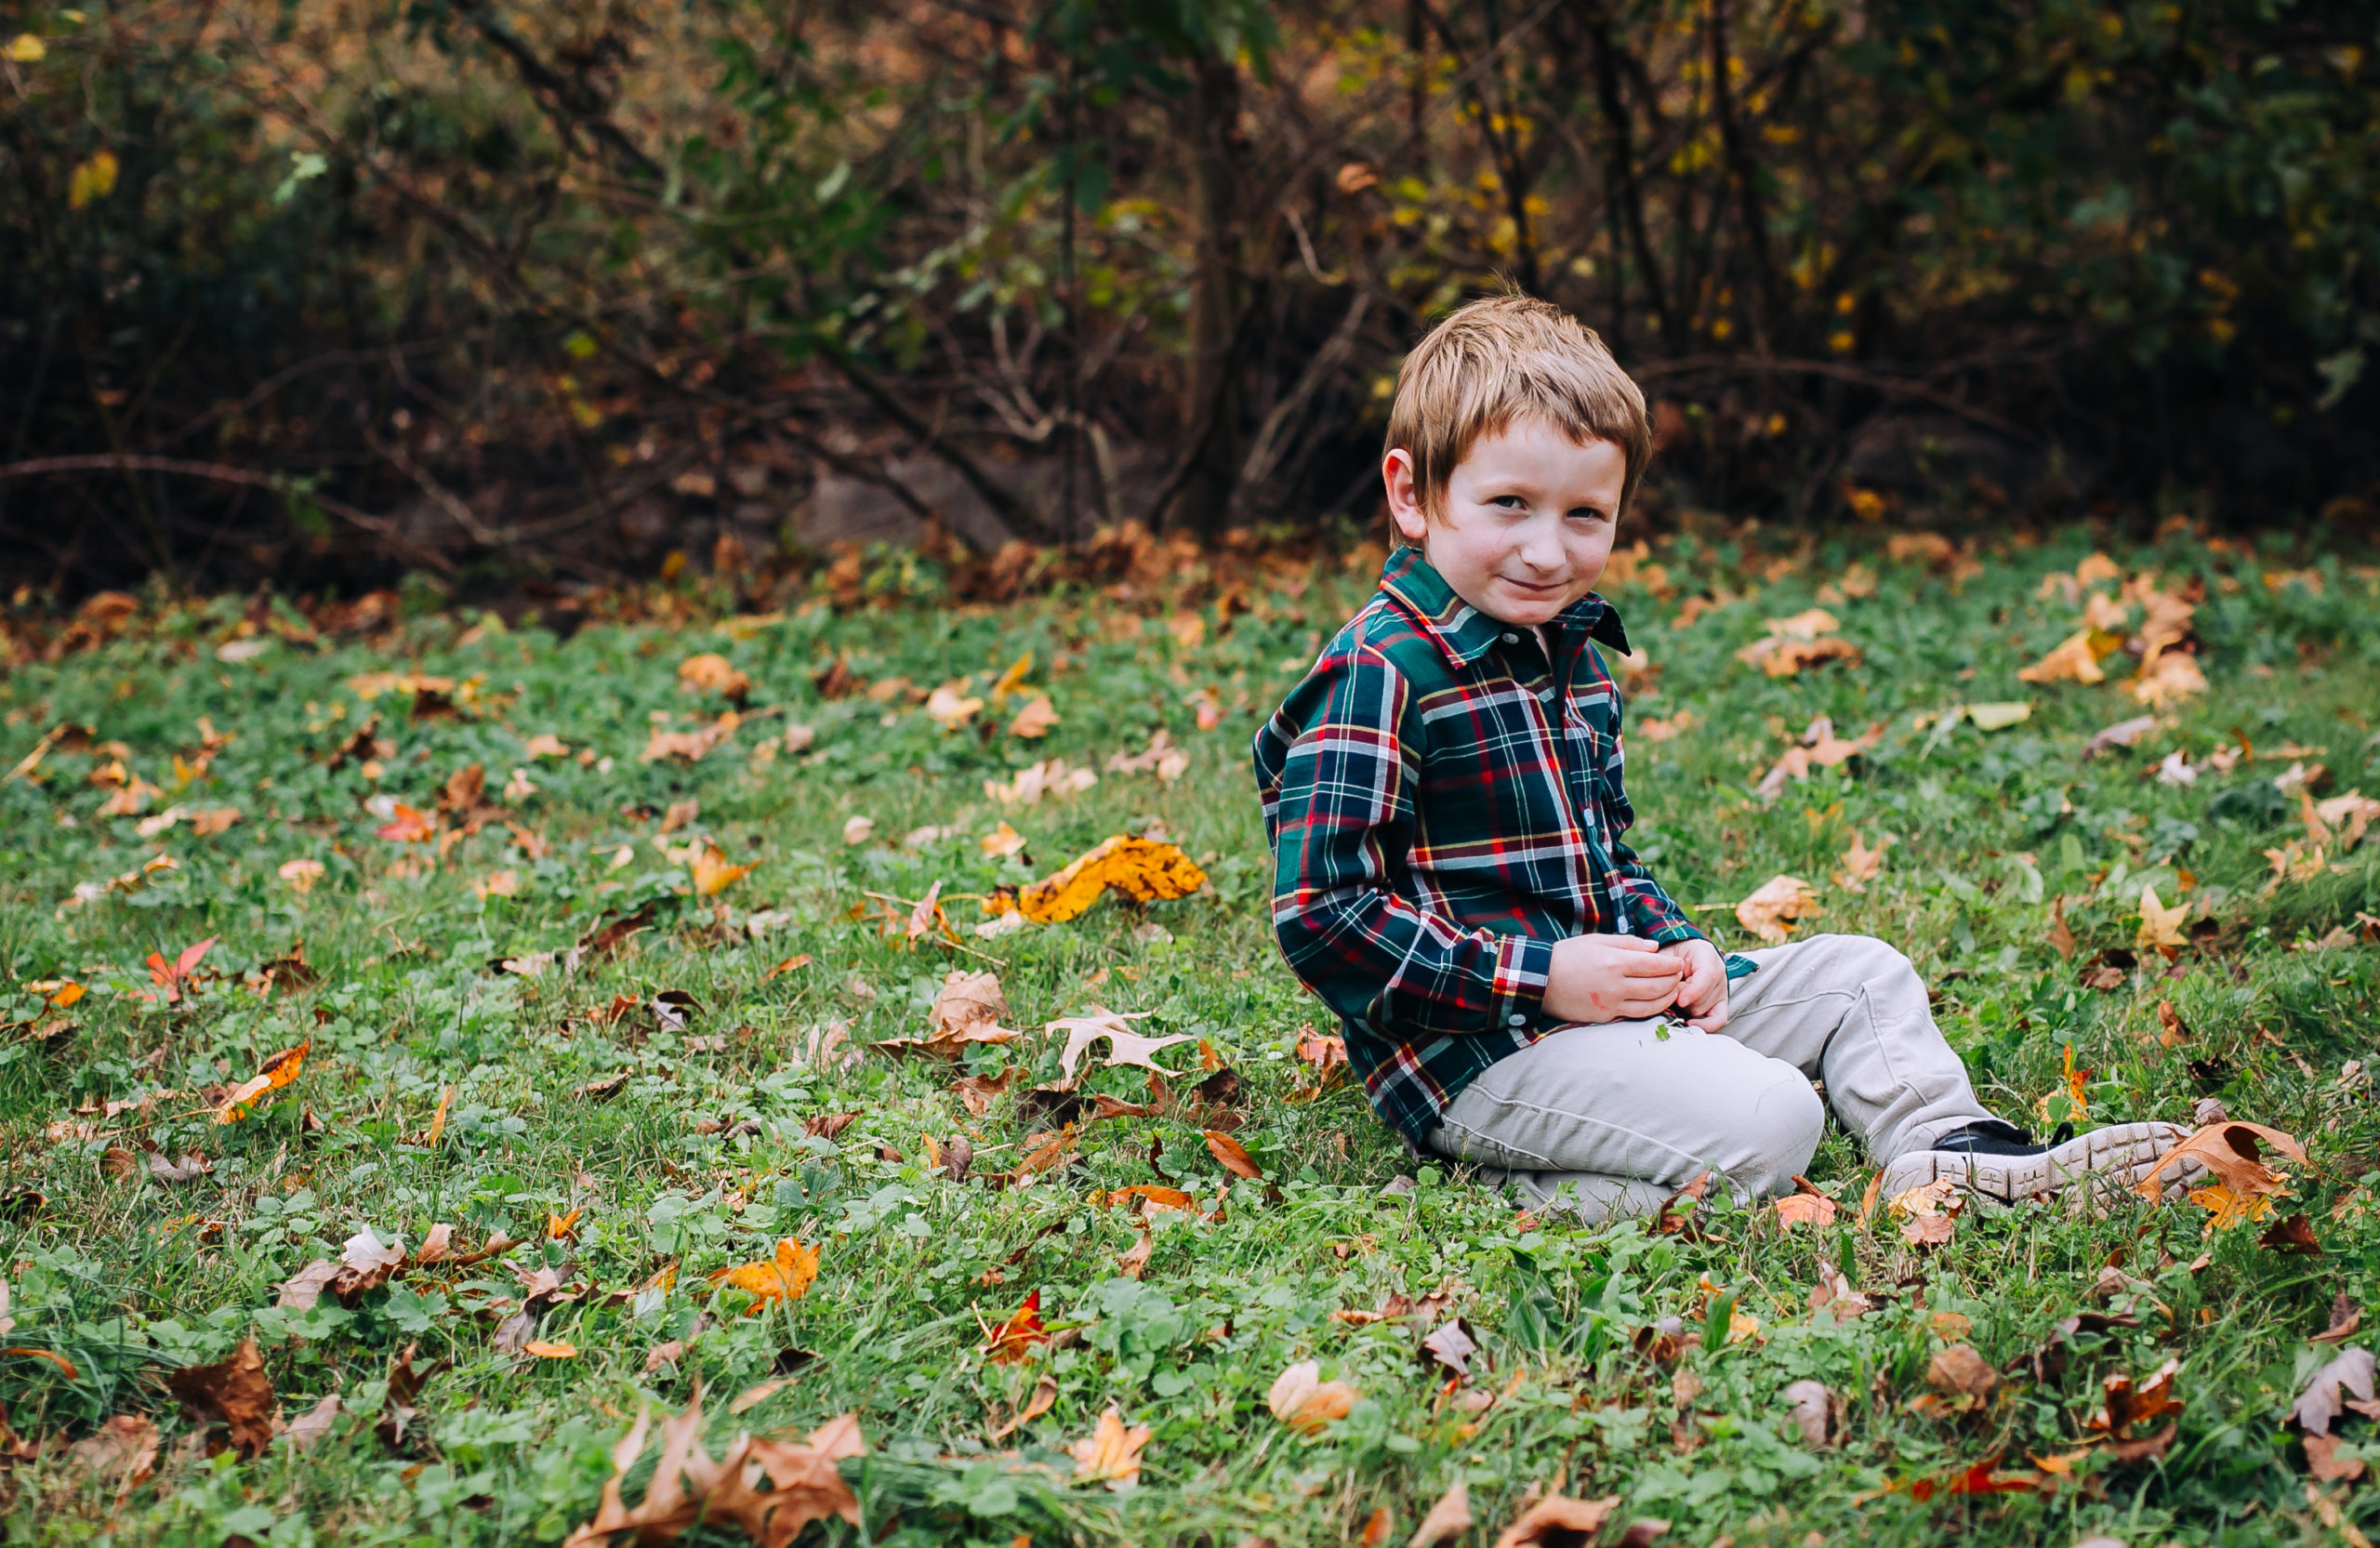 A boy sitting on the grass with fall leaves